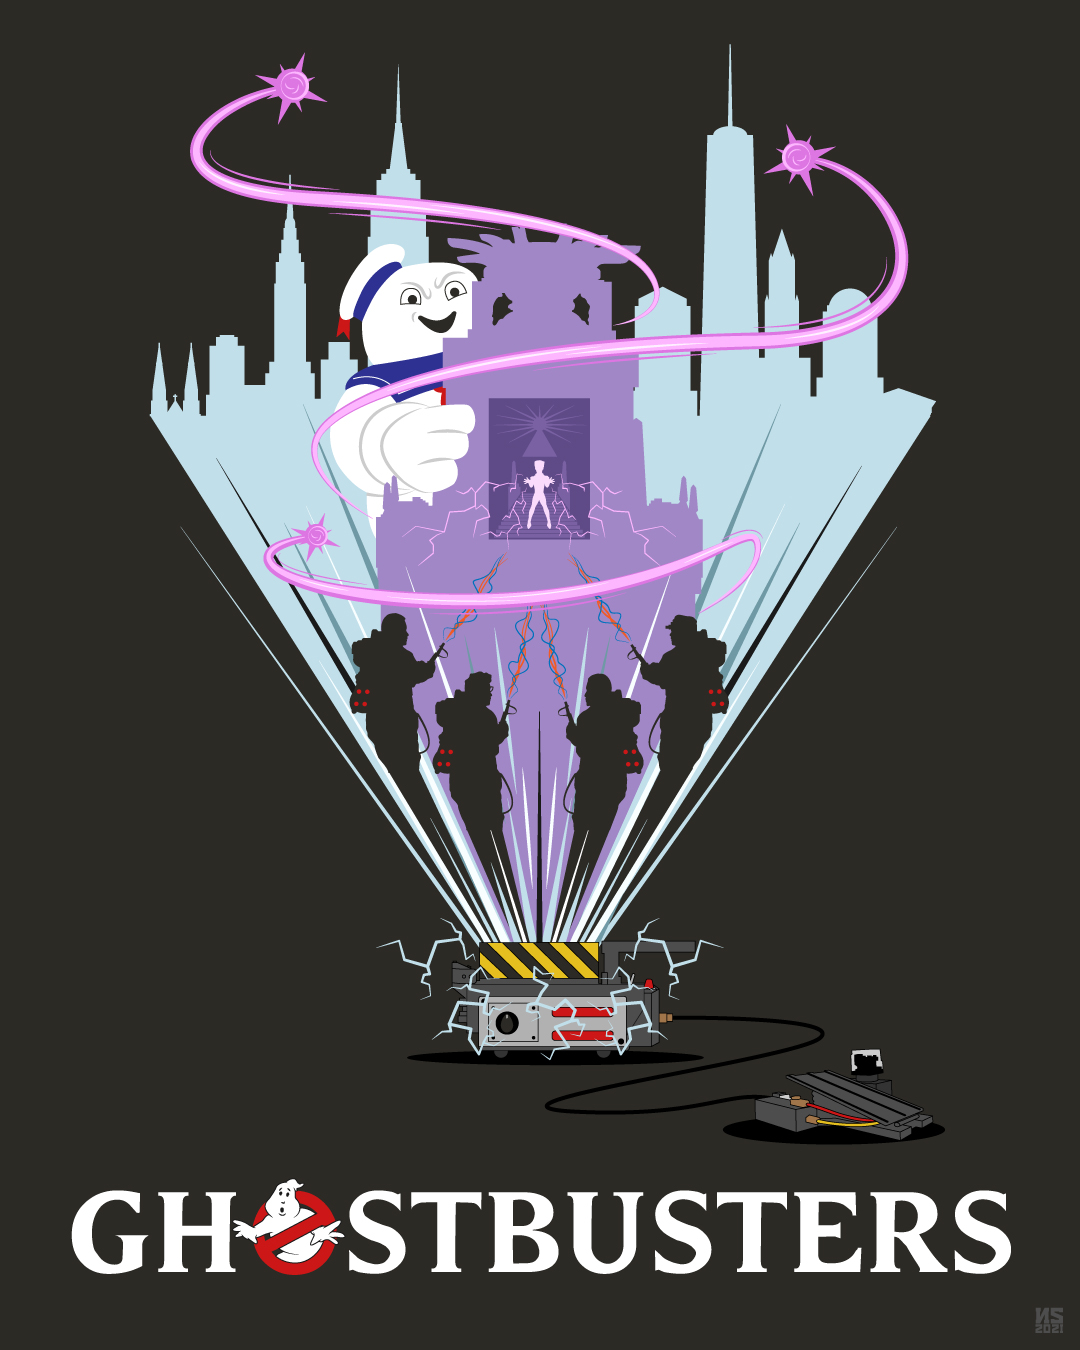 Ghostbusters Alt Poster